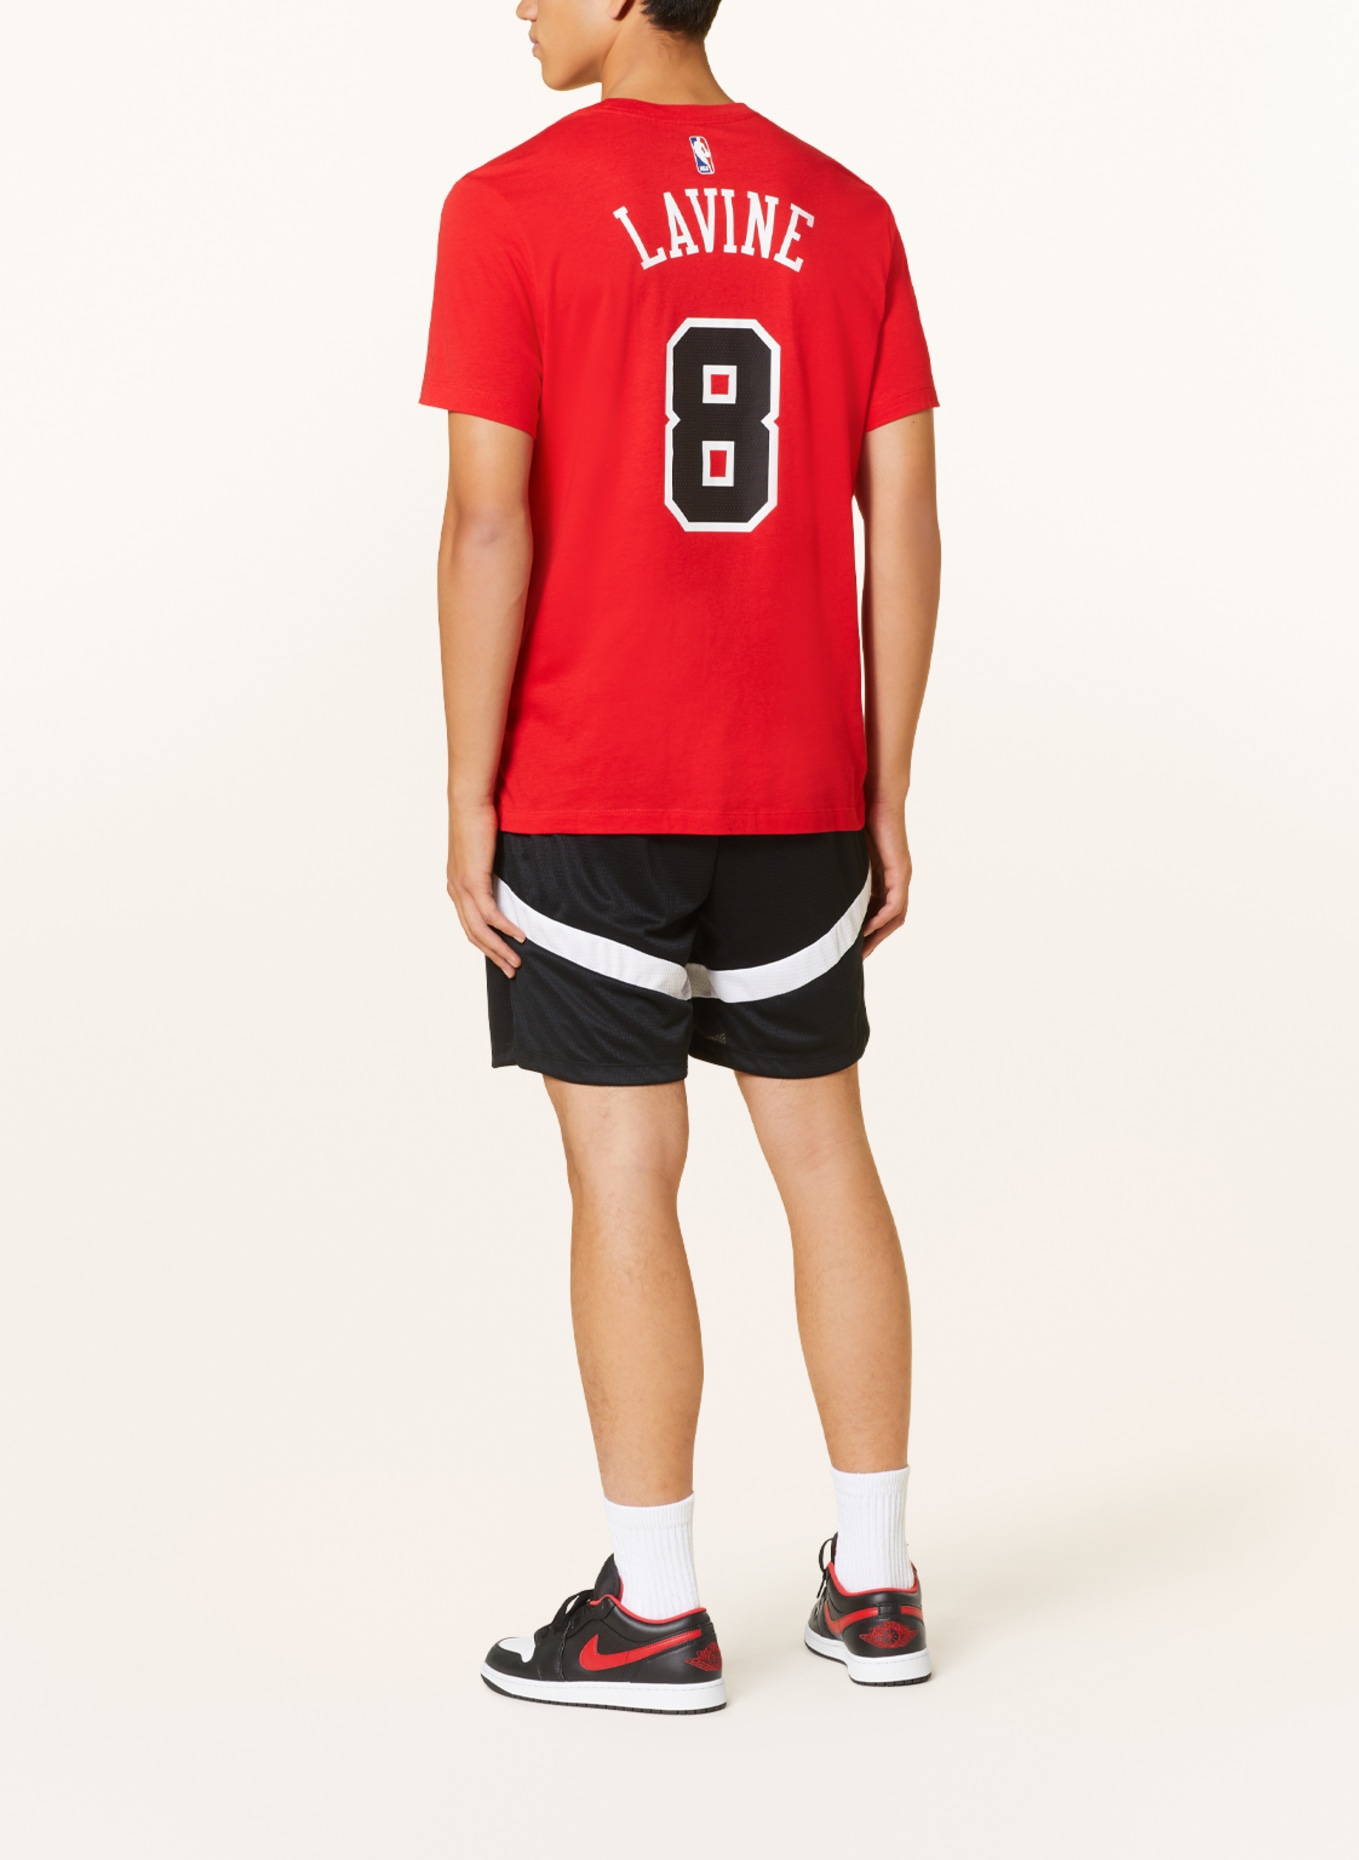 RED NIKE SNEAKERS & CHICAGO BULLS SHIRT - Style Over Function